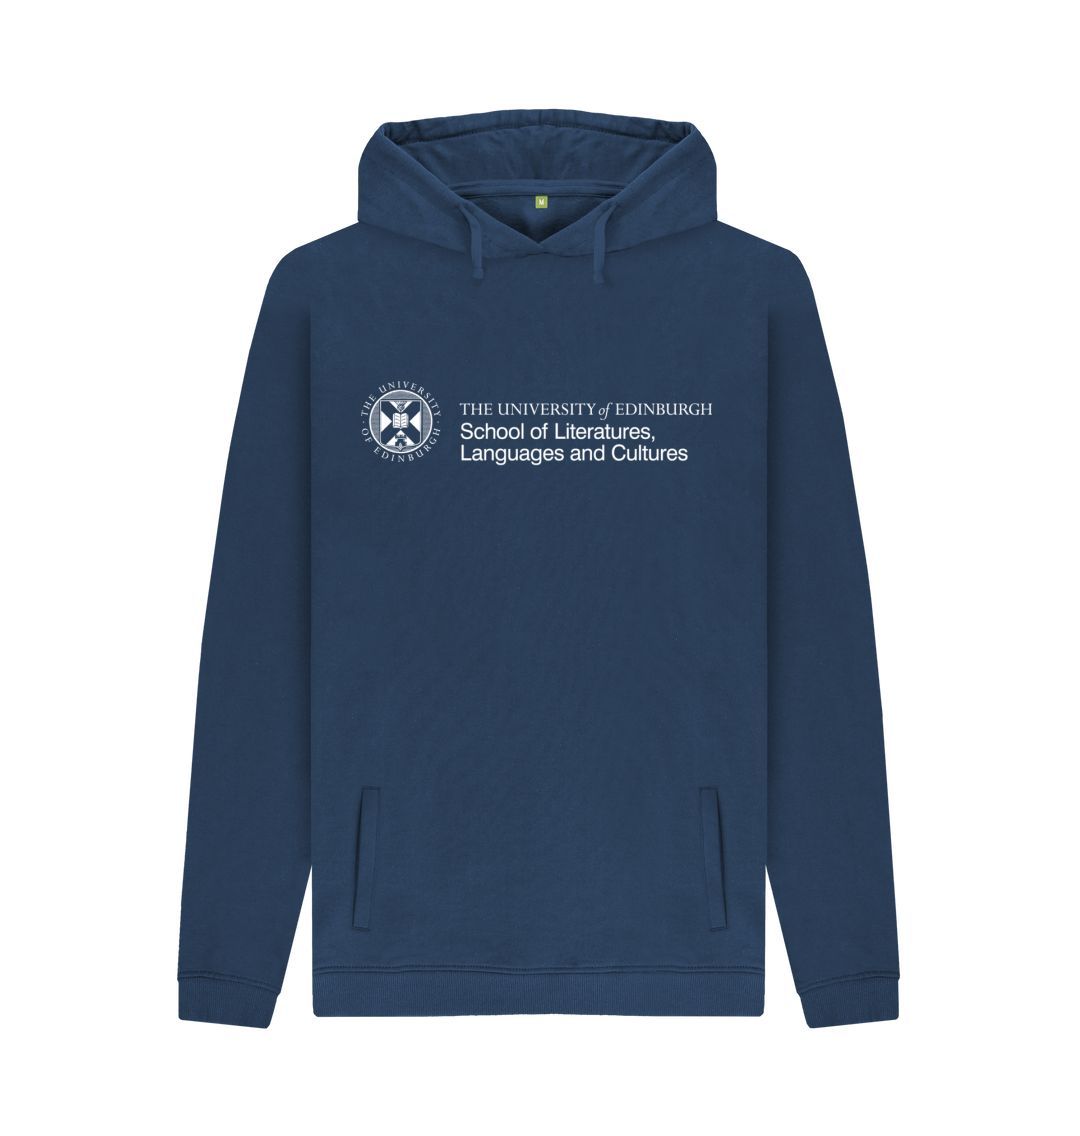 Navy hoodie with white University crest and text that reads ' University of Edinburgh School of Literatures, Languages and Cultures